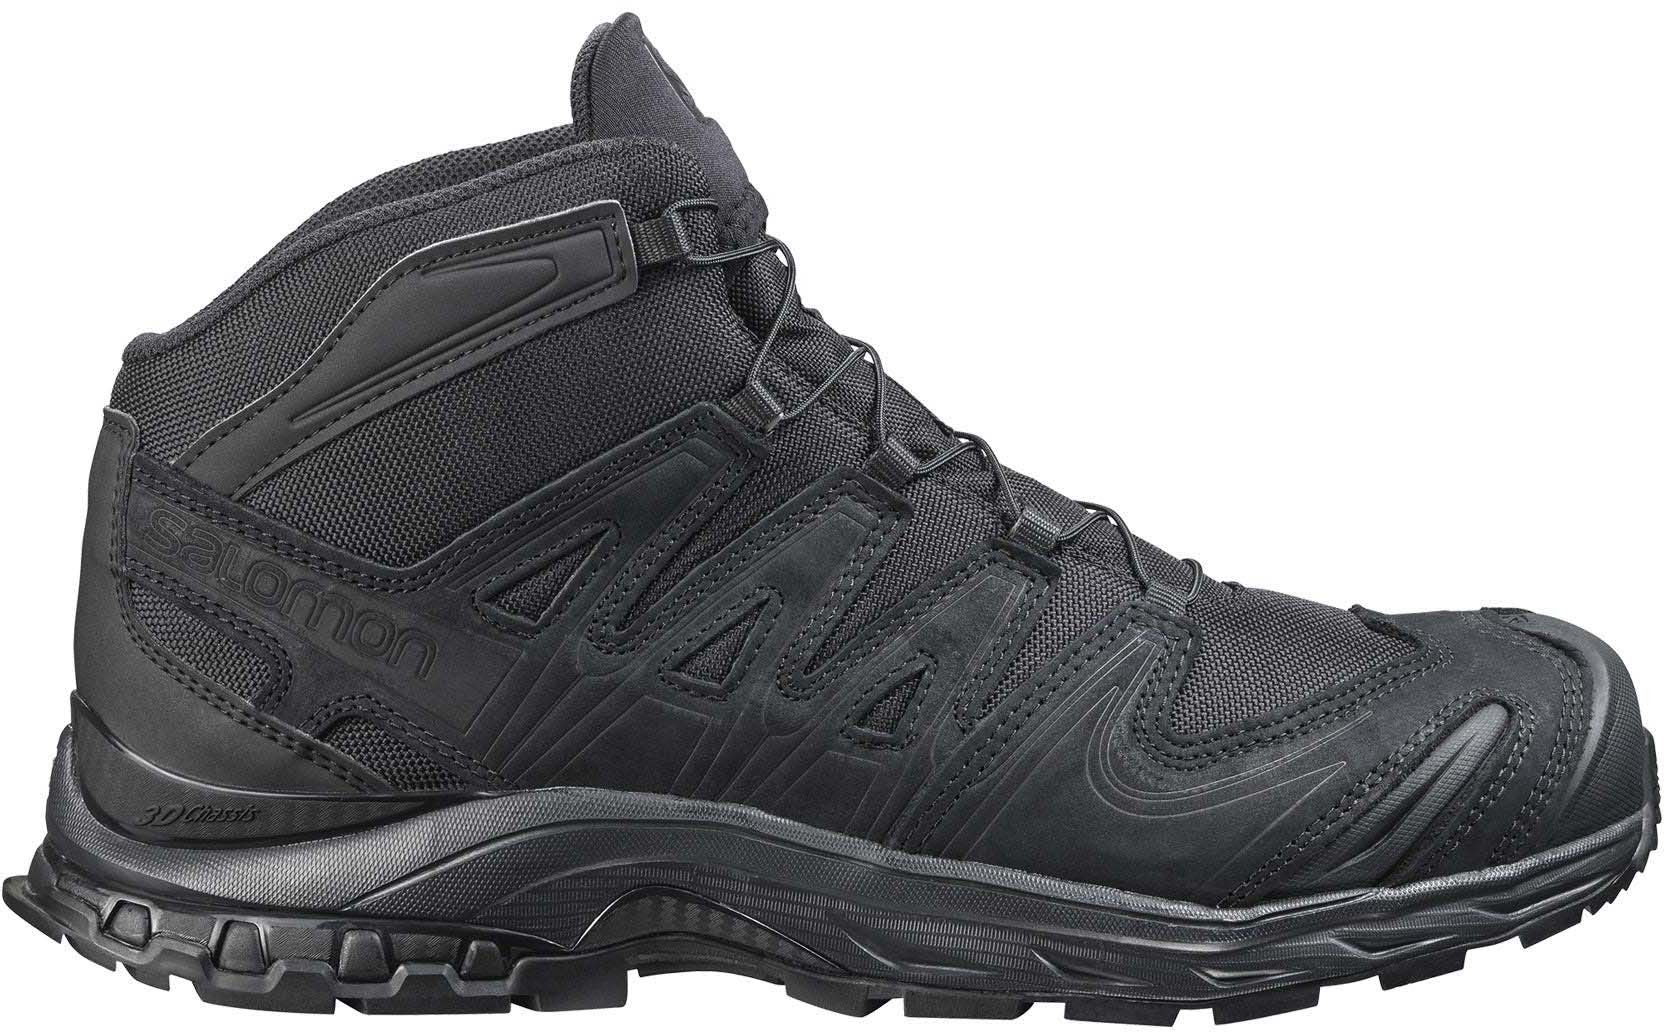 Forces XA Mid EN Boots Men's | w/ Free Shipping and Handling